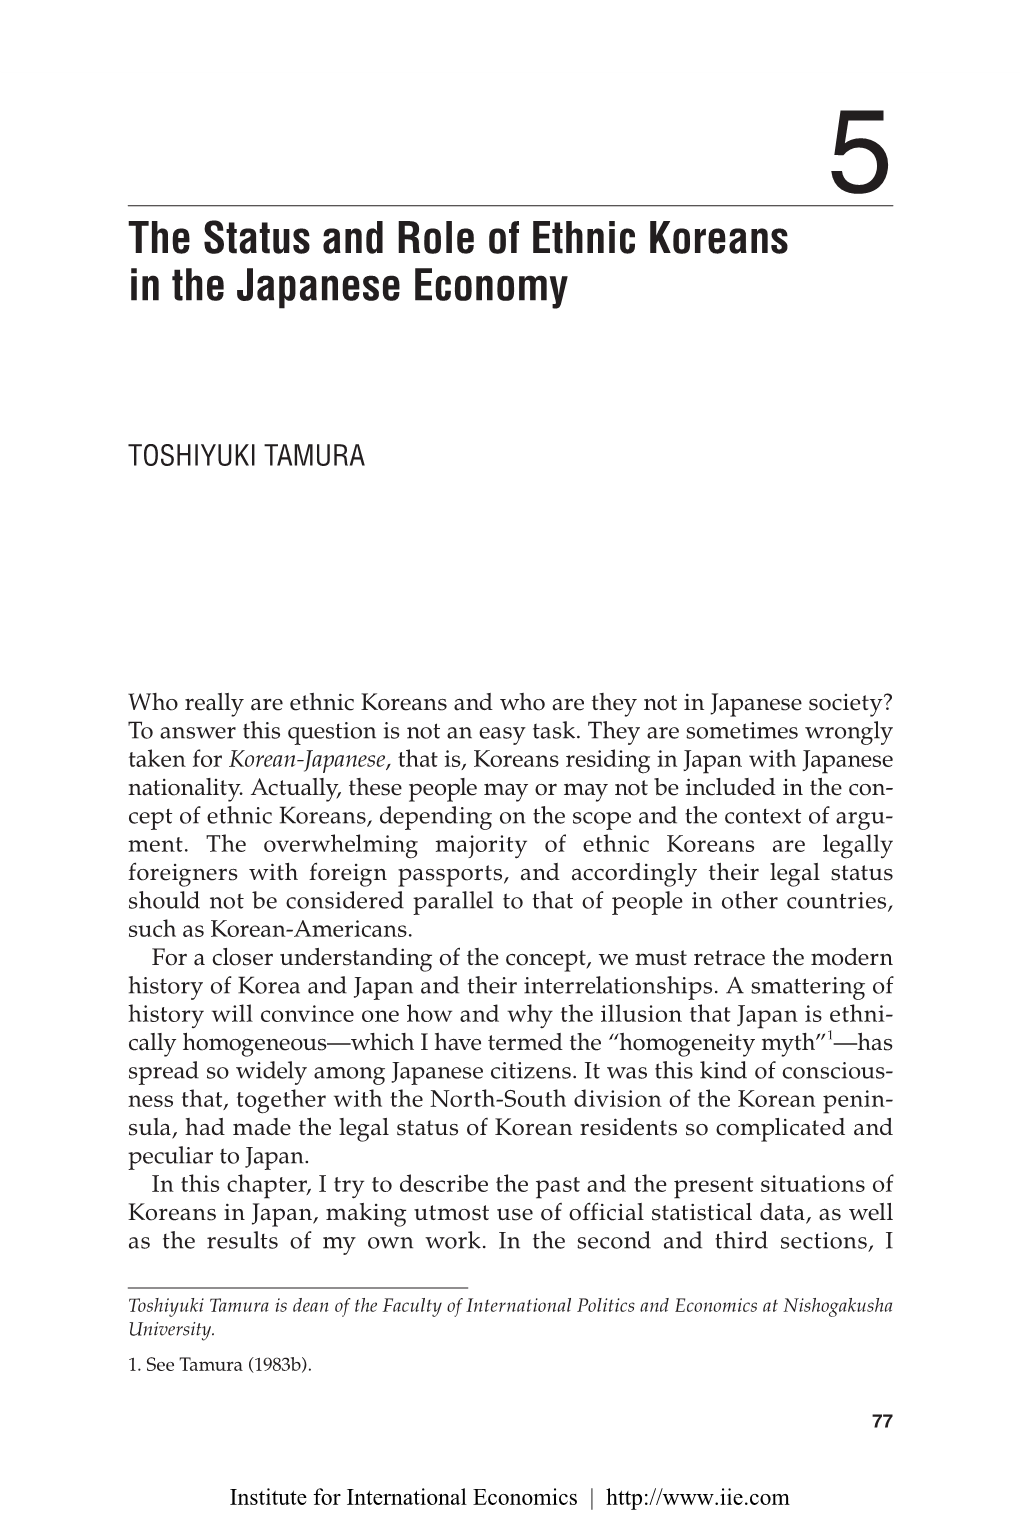 The Status and Role of Ethnic Koreans in the Japanese Economy